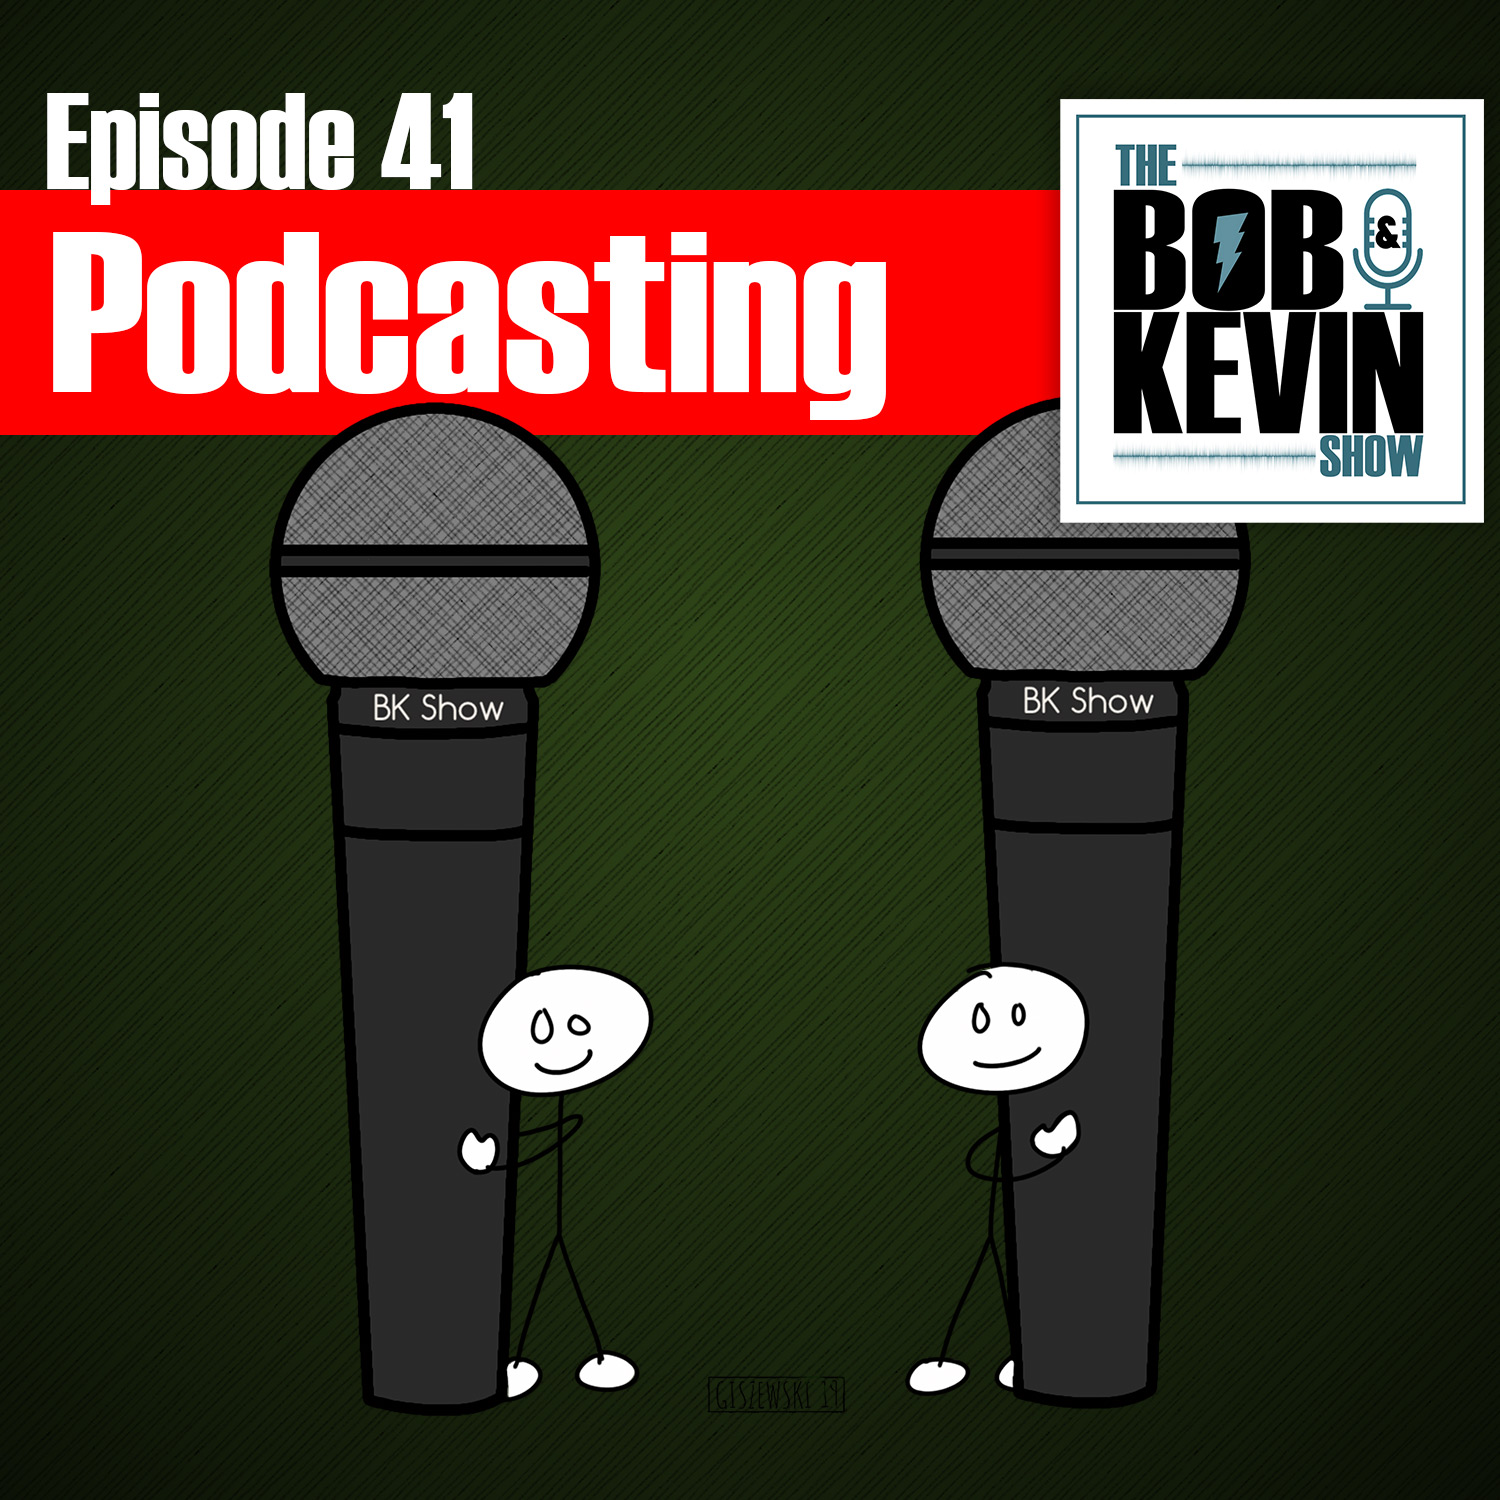 Ep. 041 - Podcast on podcasting inspired by Joe Rogan with Kevin Smith #1123 and many ...